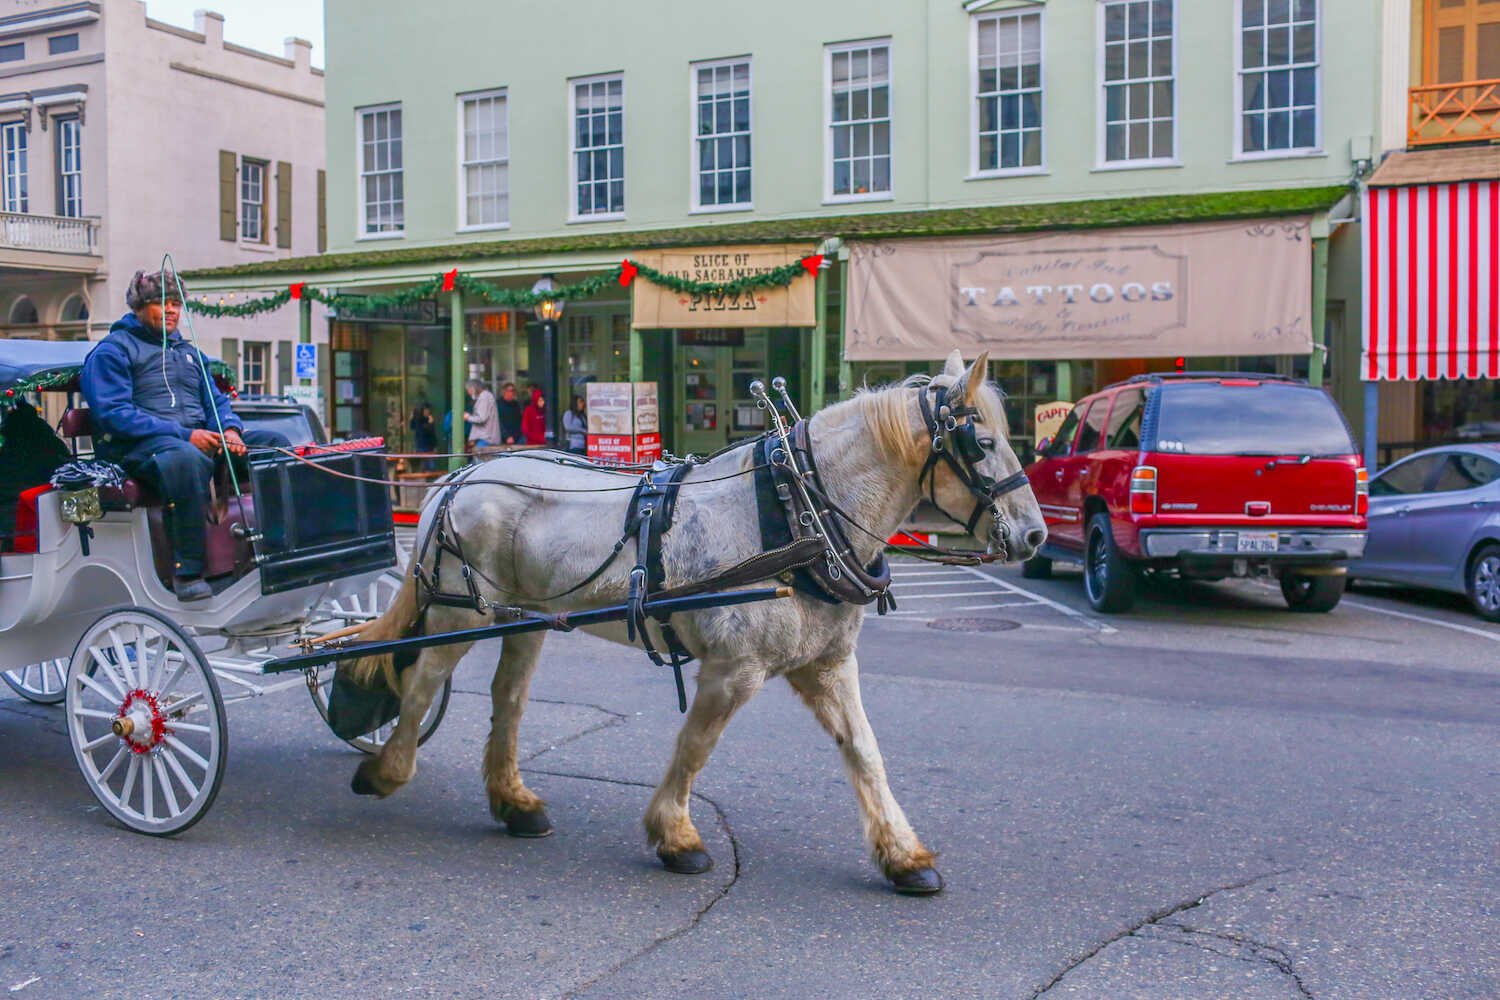 Visitor’s Guide to Old Sacramento - Horse-drawn carriage rides in Old Sacramento.